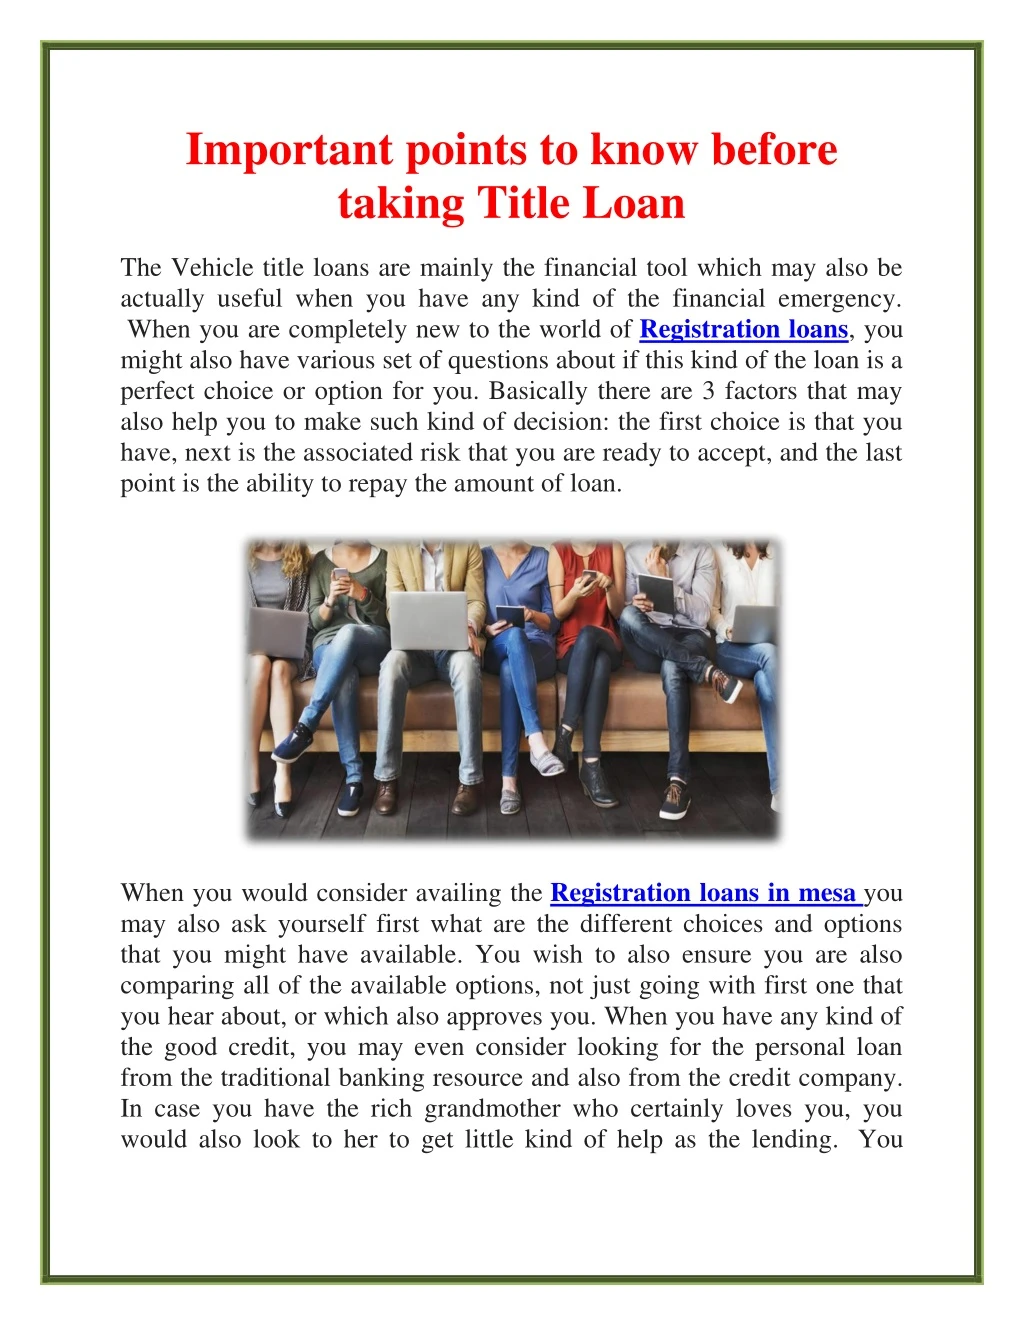 important points to know before taking title loan